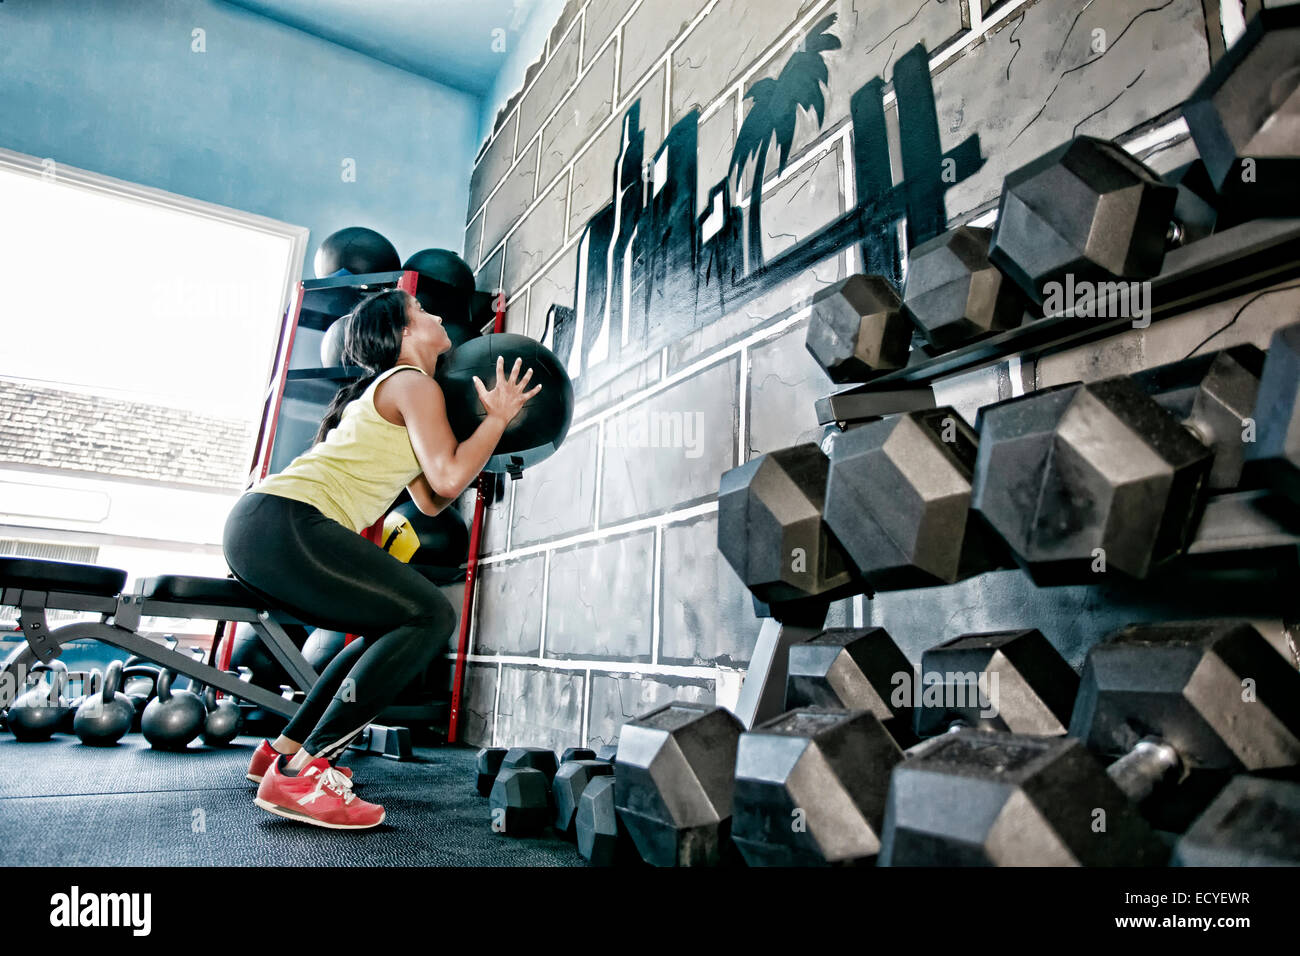 Hispanic woman exercising in gym Banque D'Images